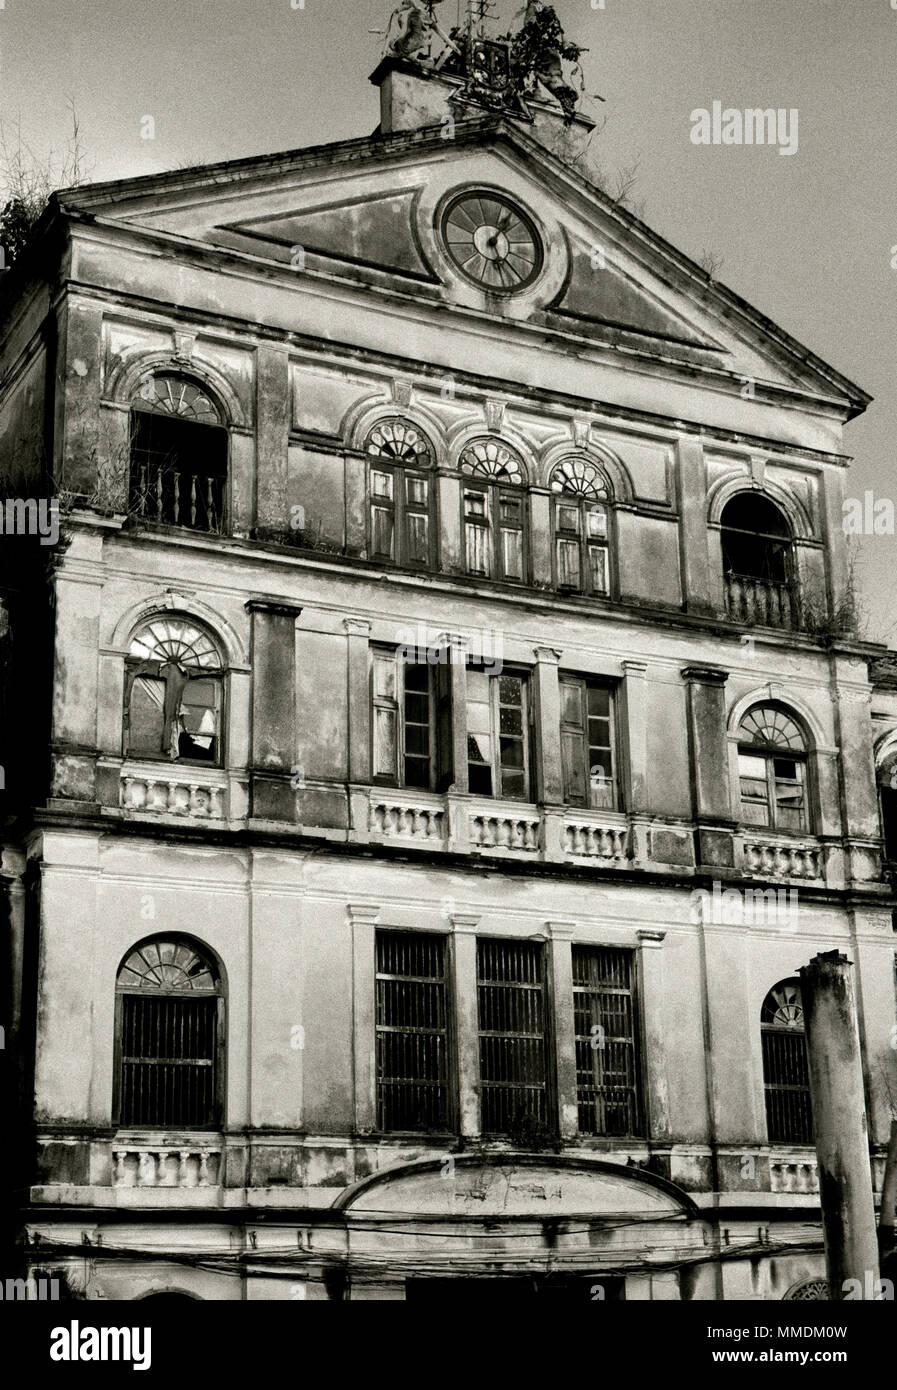 The Old Customs House dilapidated building in Bangkok in Thailand in Southeast Asia Far East. Architecture History Historical Dilapidation Colonial Stock Photo